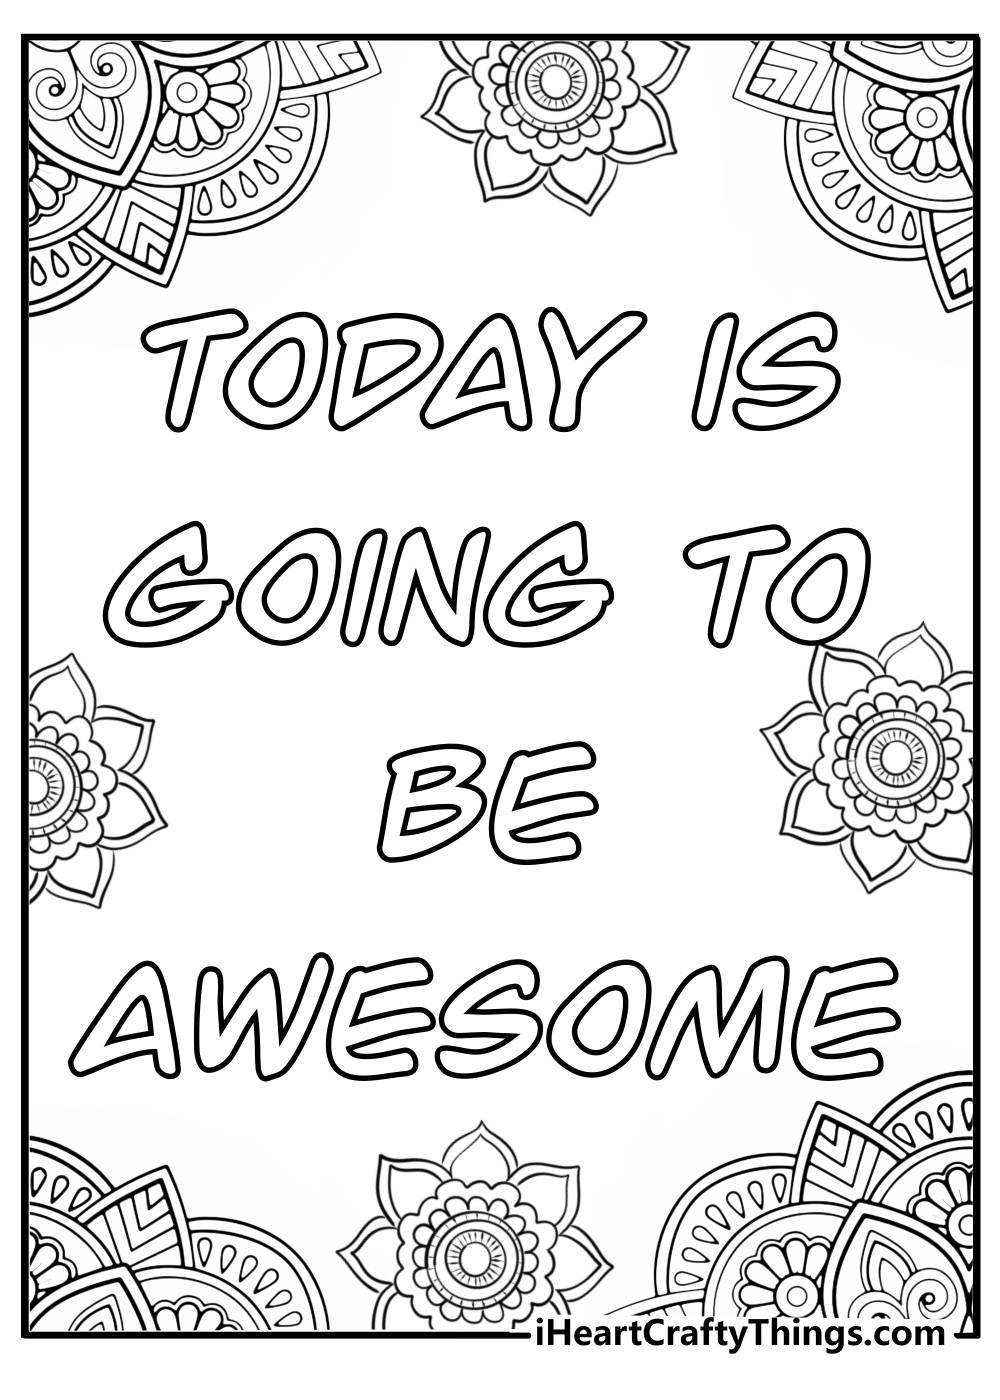 Free inspirational coloring pages for adults